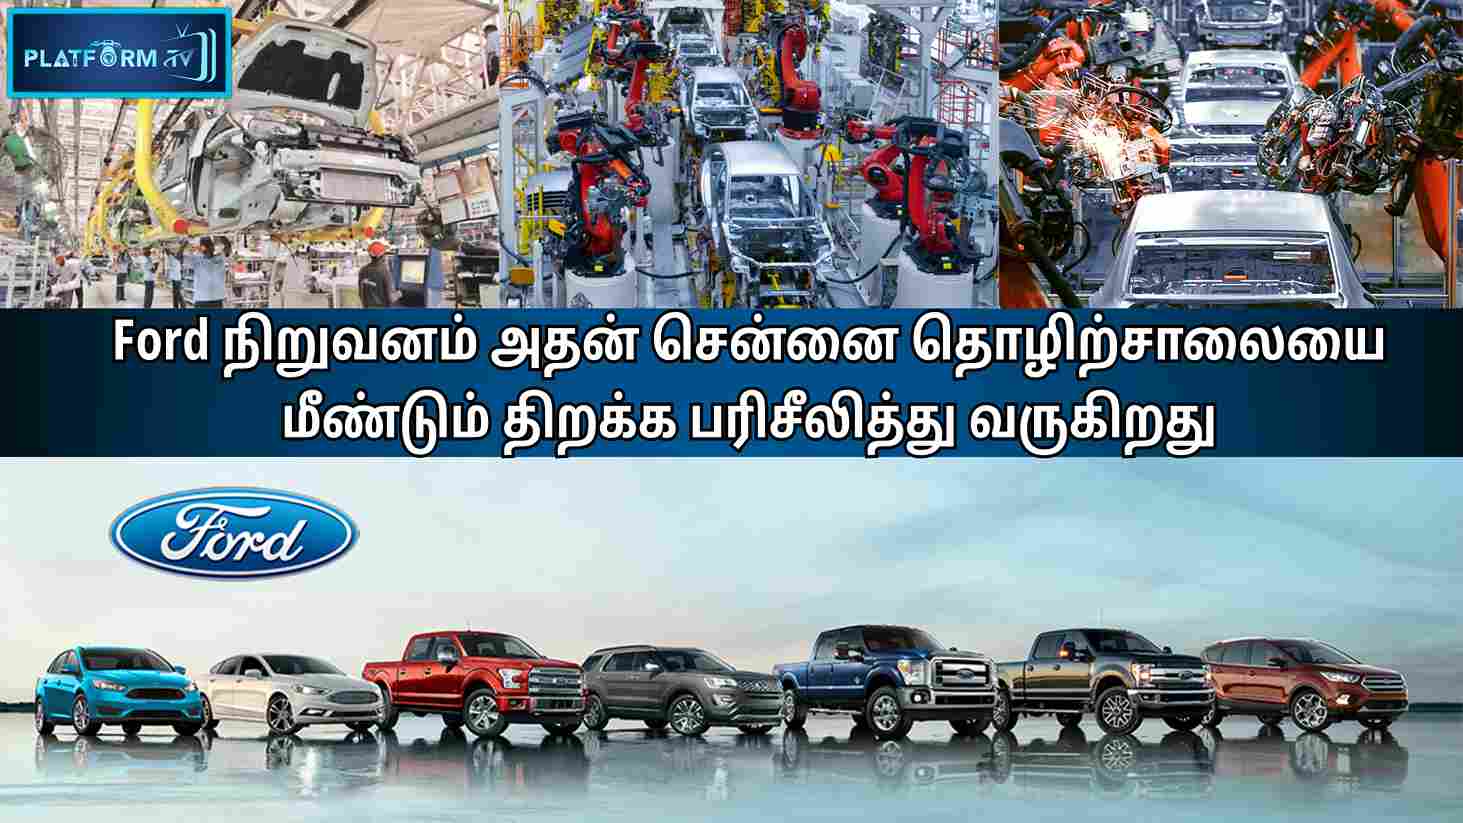 Reopening of Ford’s Chennai Factory - Platform Tamil